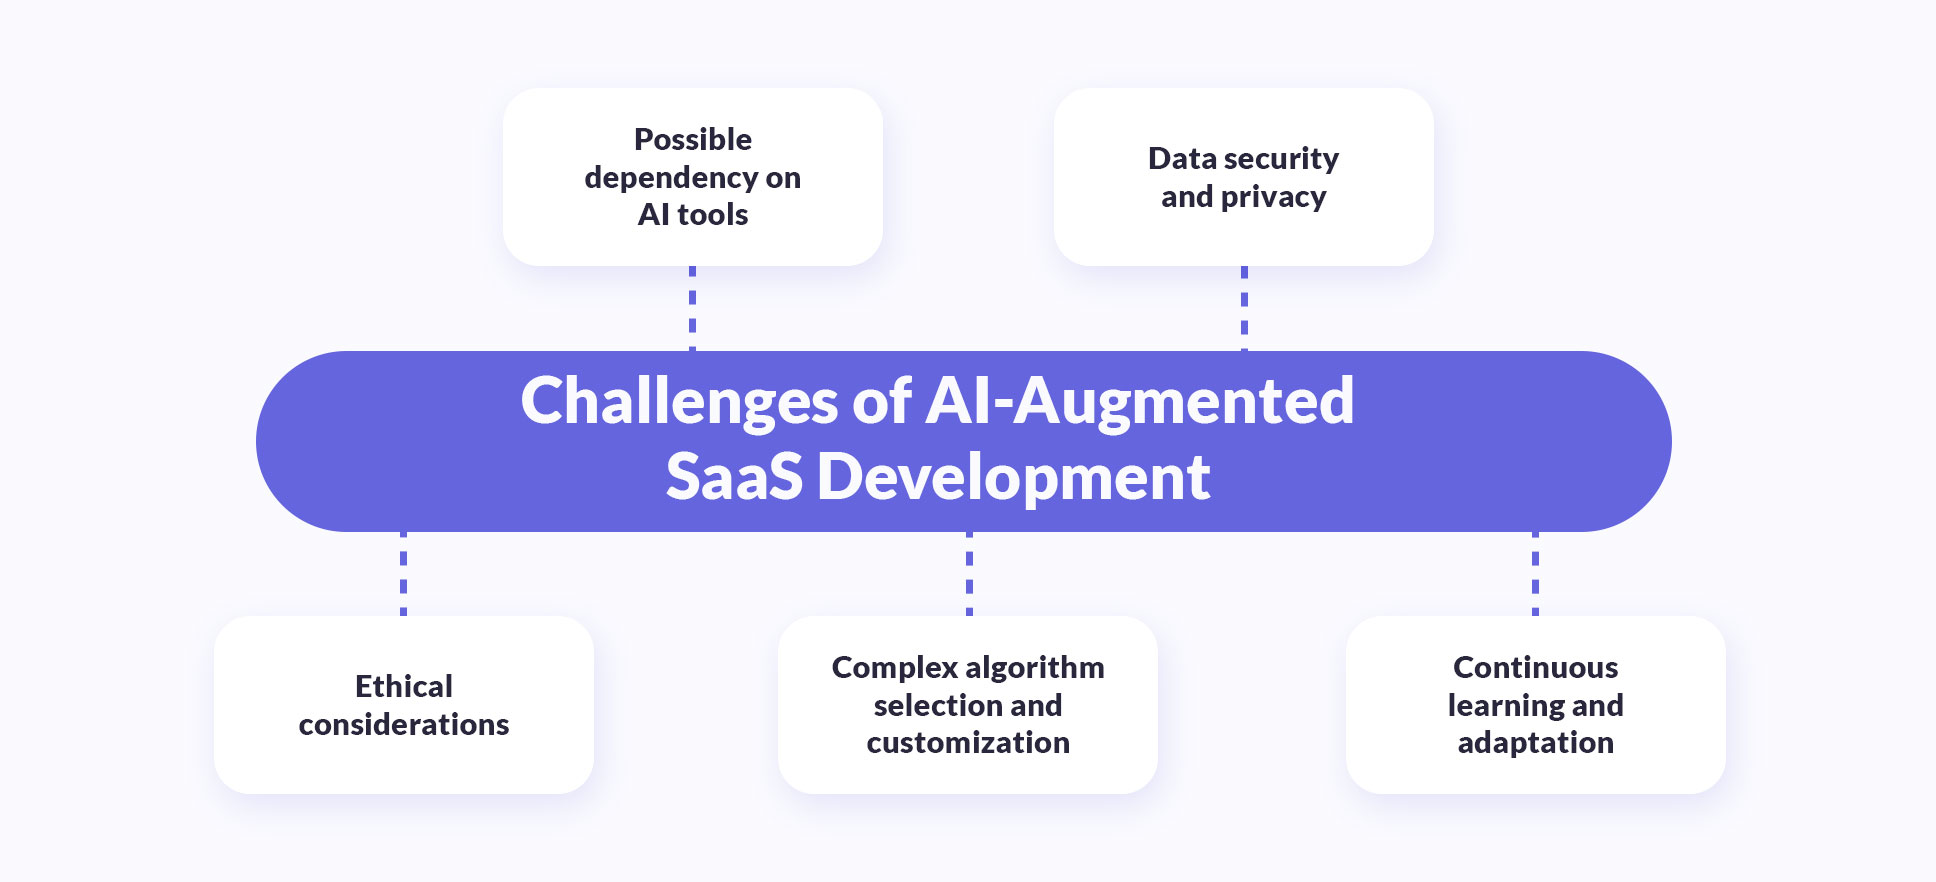 Challenges of AI-augmented SaaS development